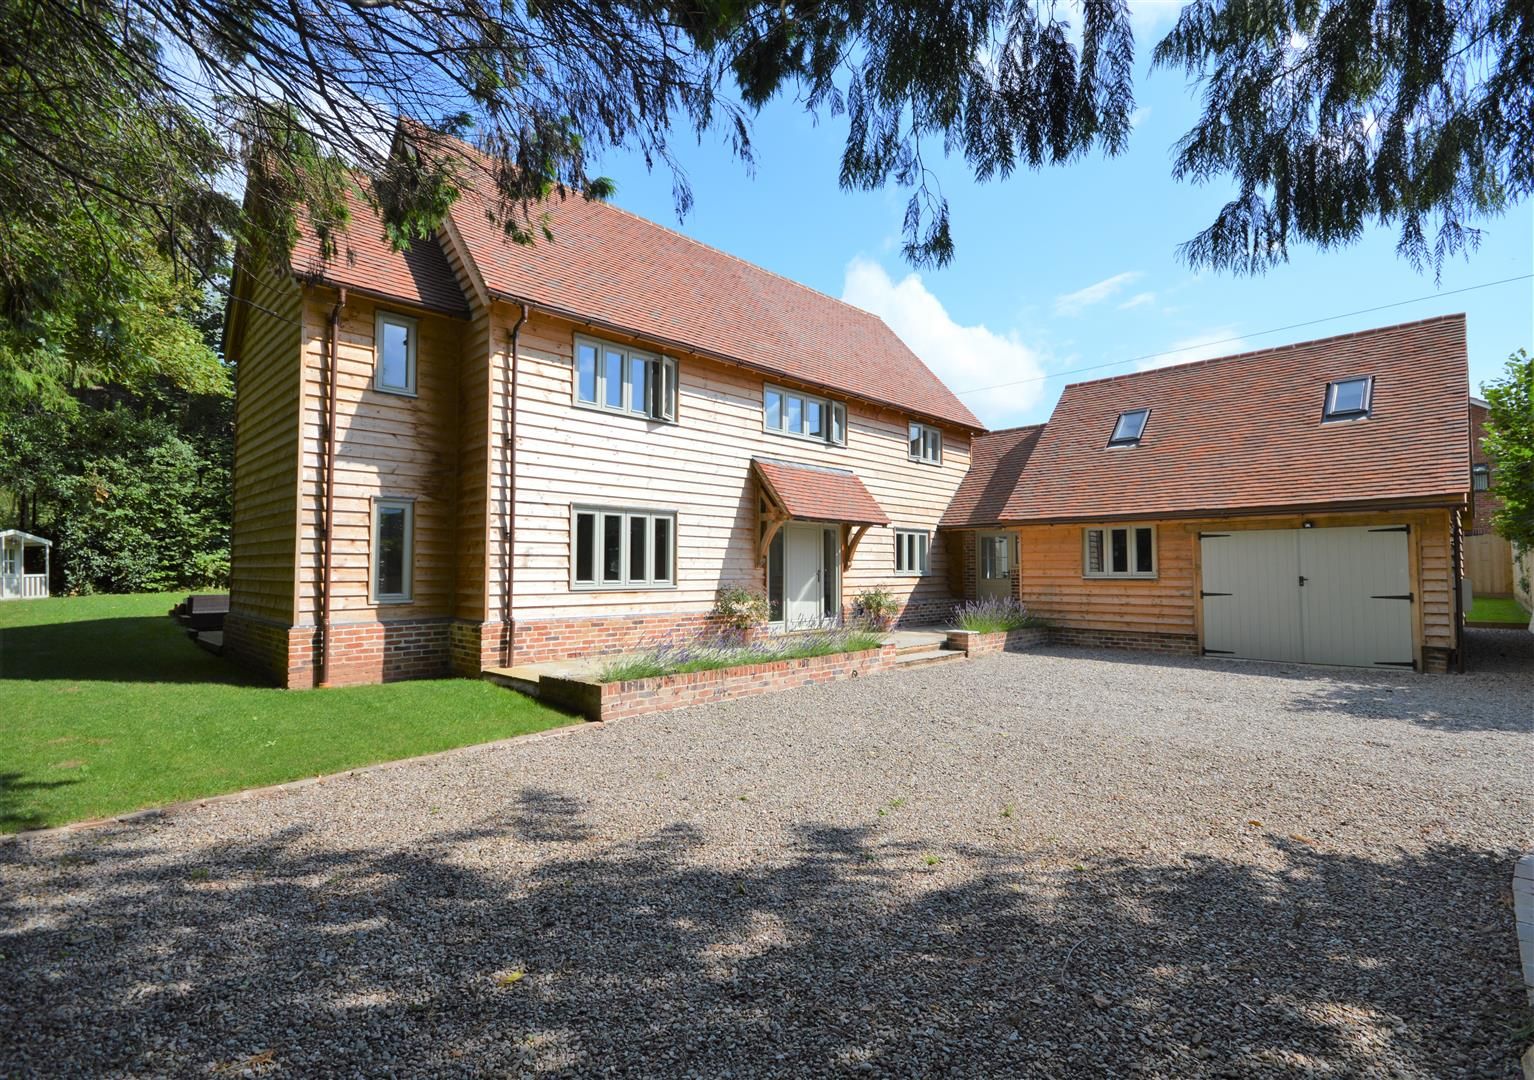 4 bed detached for sale in Bodenham  - Property Image 1